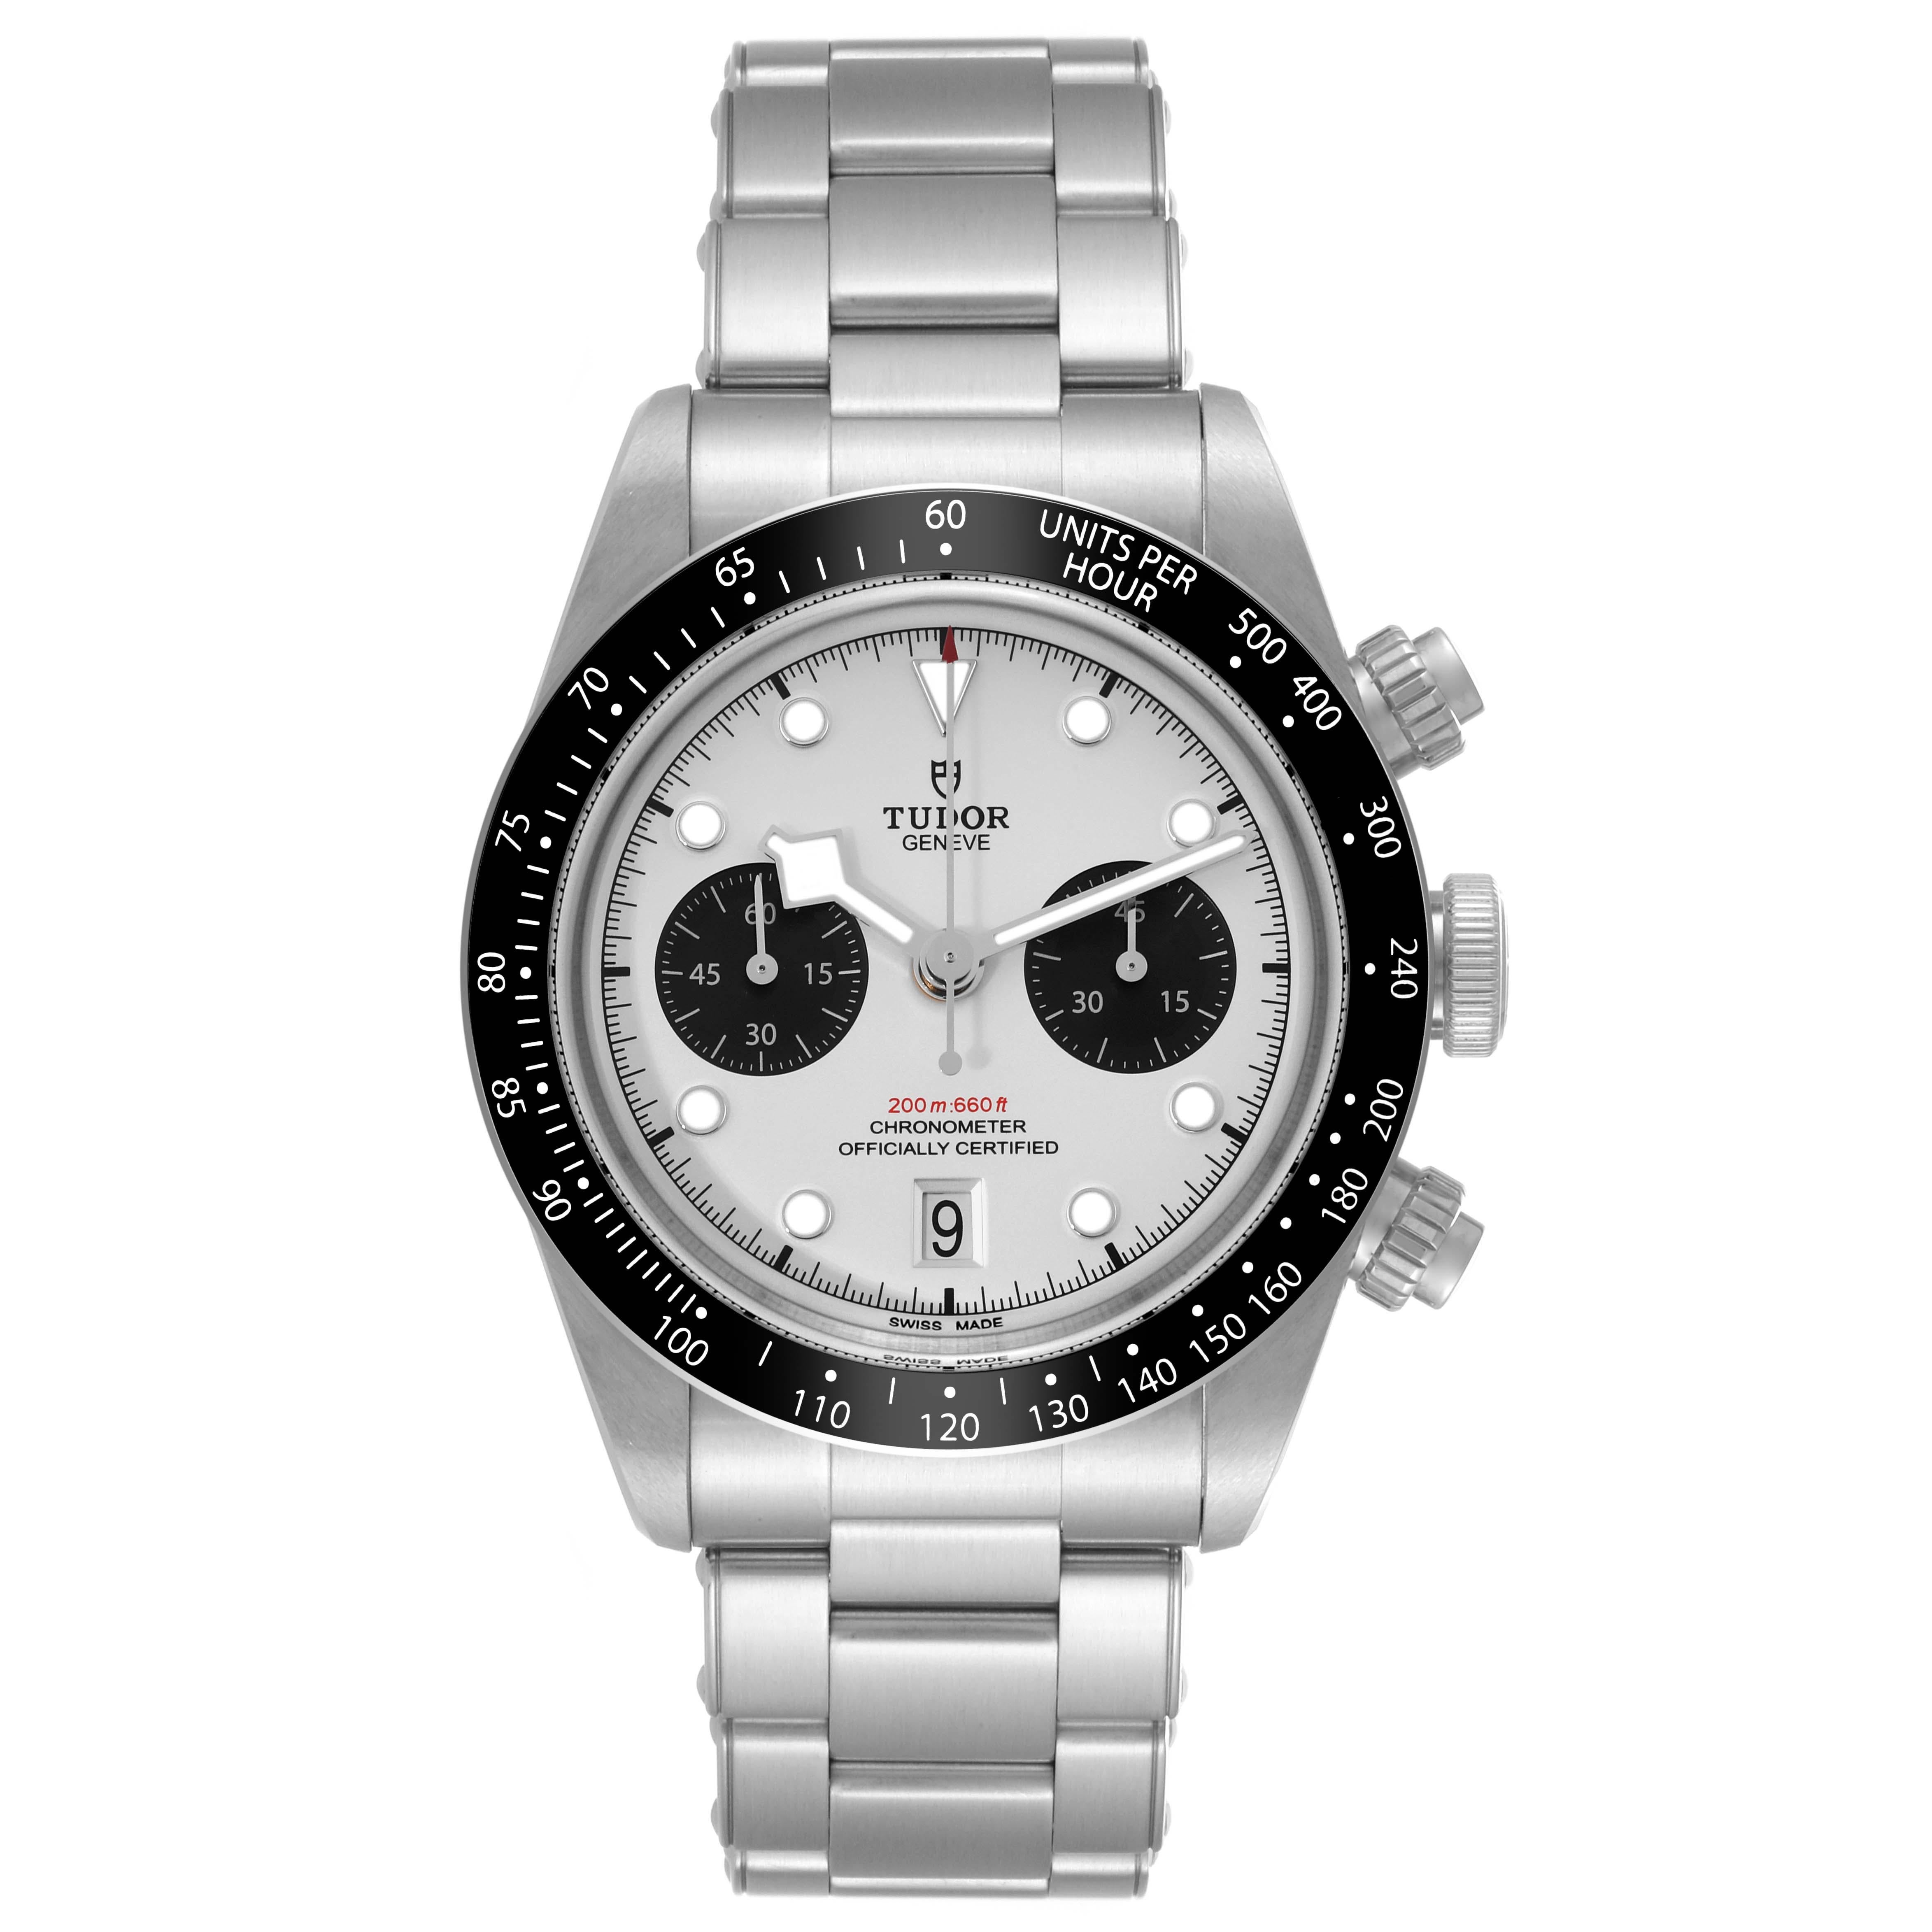 Tudor Black Bay Chronograph Panda Dial Steel Mens Watch 79360 Box Card. Automatic self-winding chronograph movement. Stainless steel oyster case 41 mm in diameter. Tudor logo on the crown. Matte black aluminum bezel with a tachymeter scale. Scratch